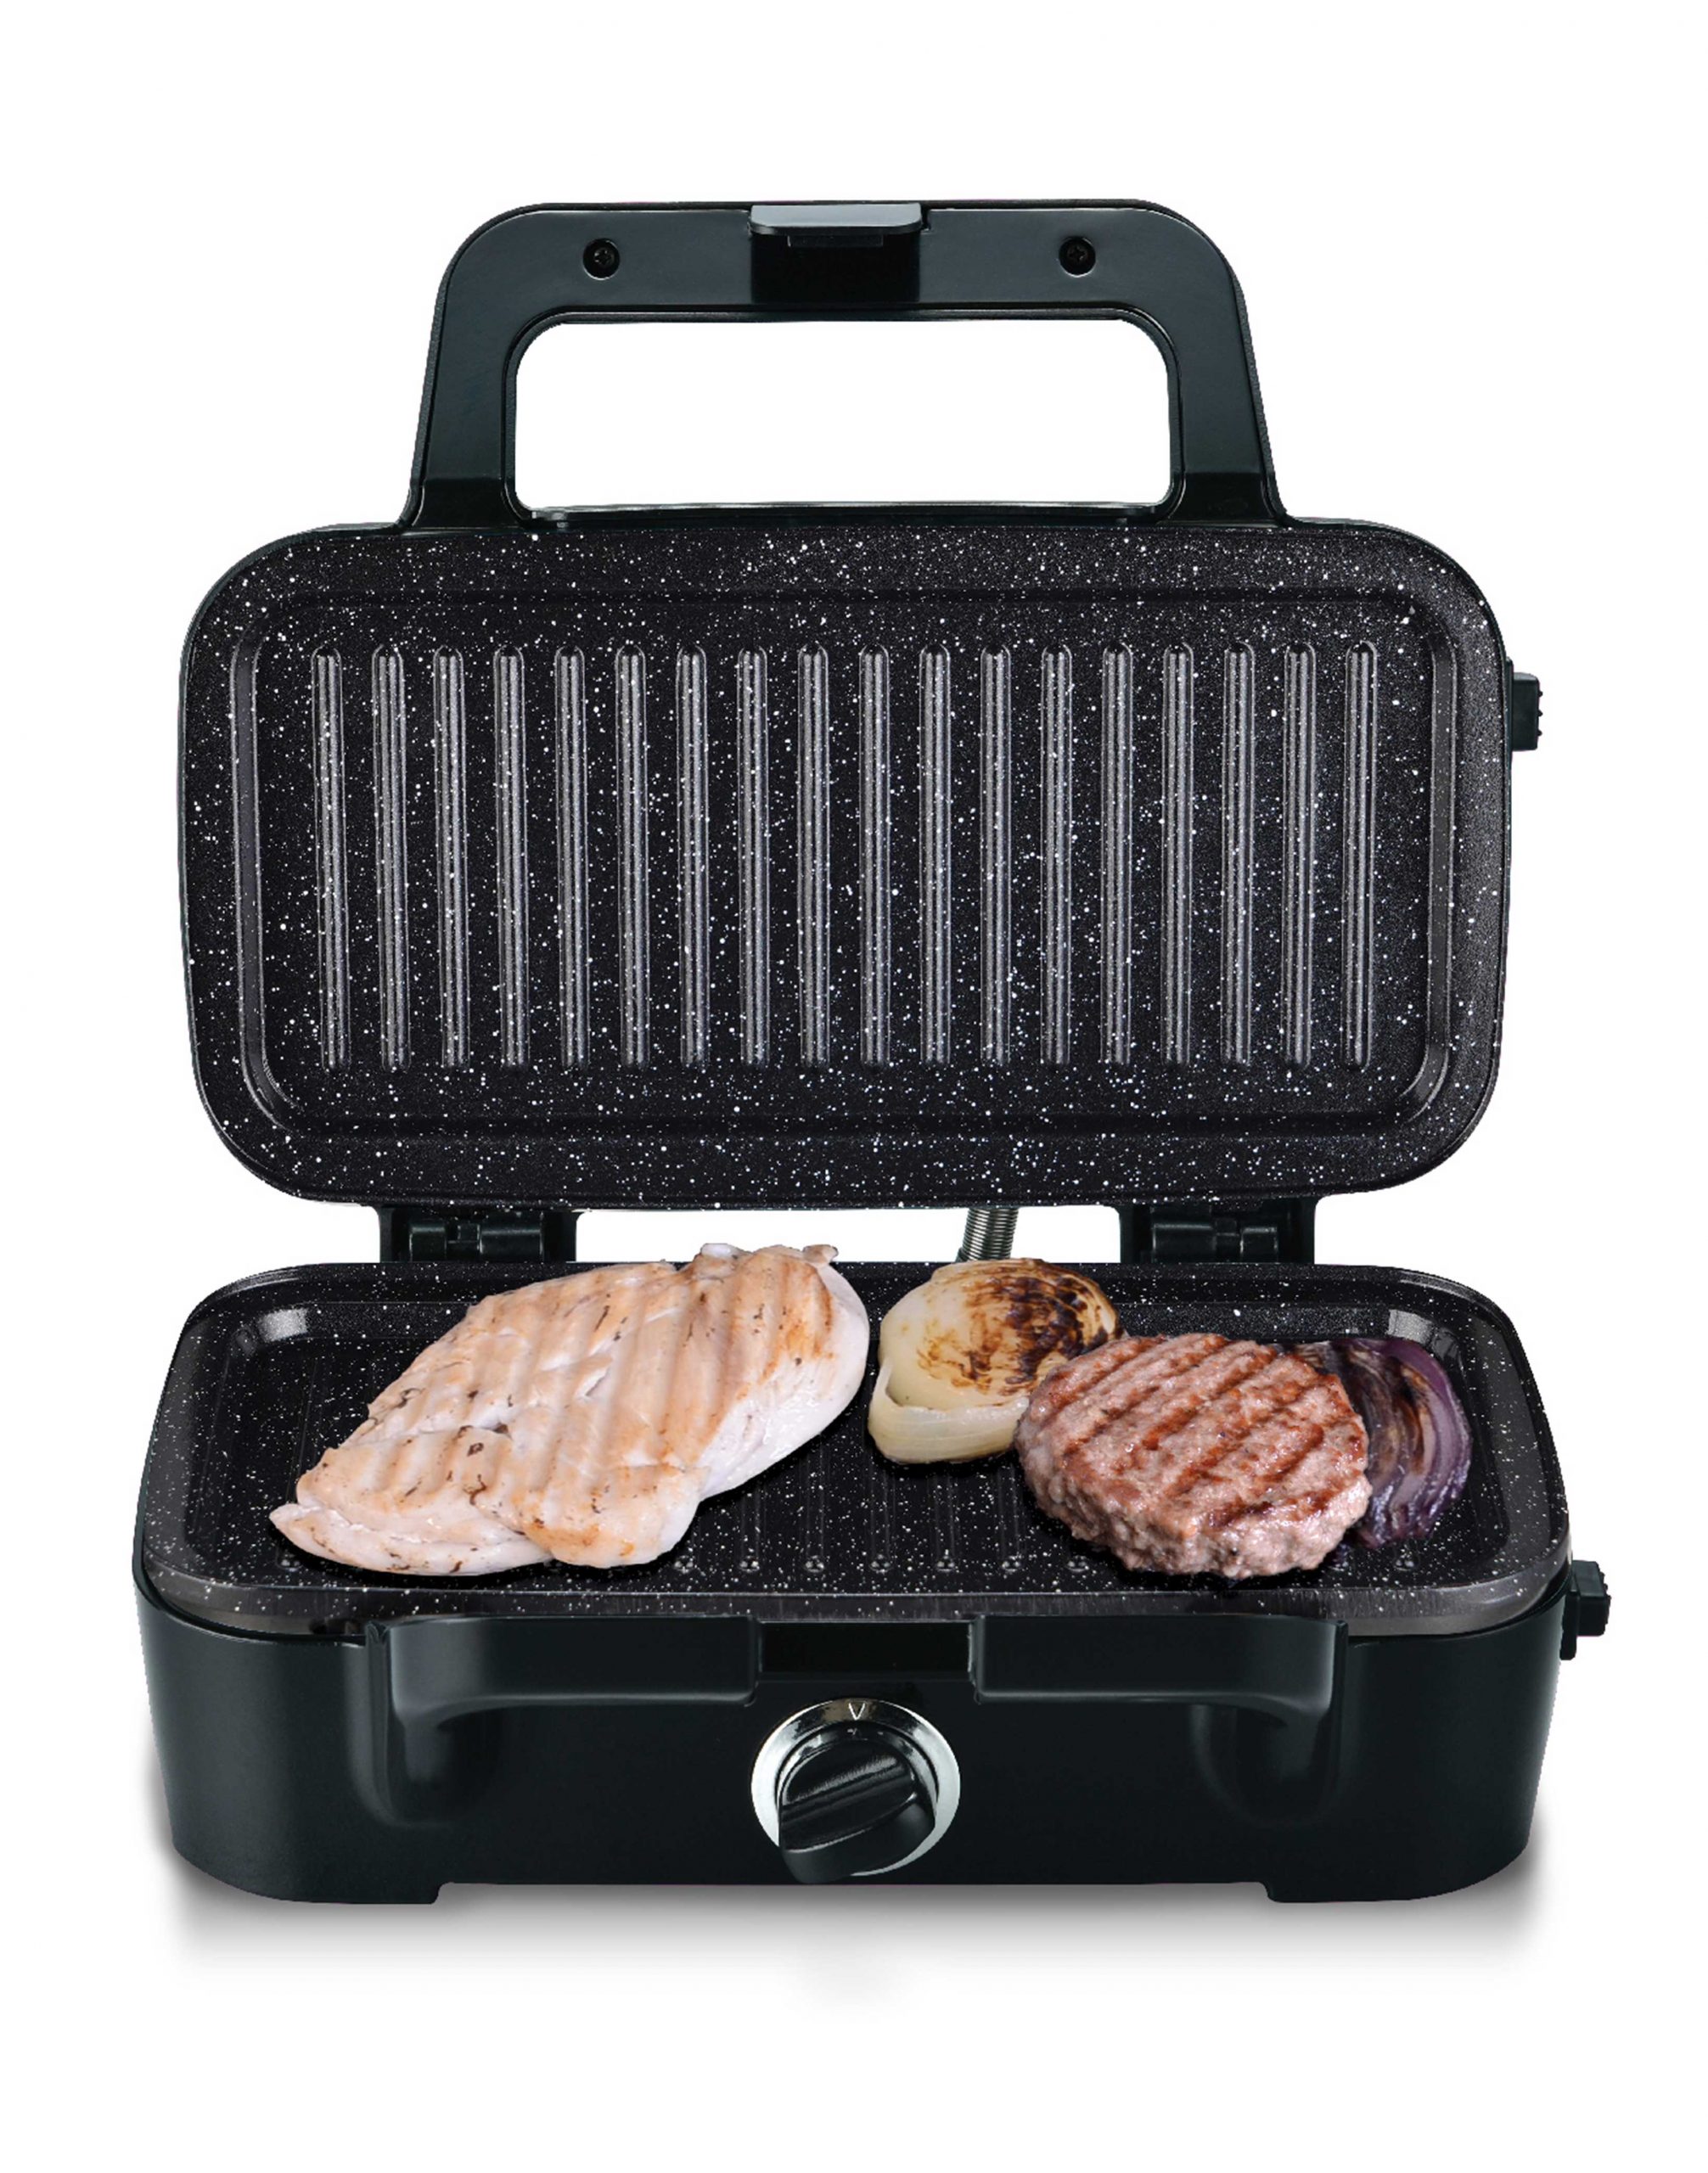 3-in-1 sandwich maker: electric sandwich maker, Grill and waffle